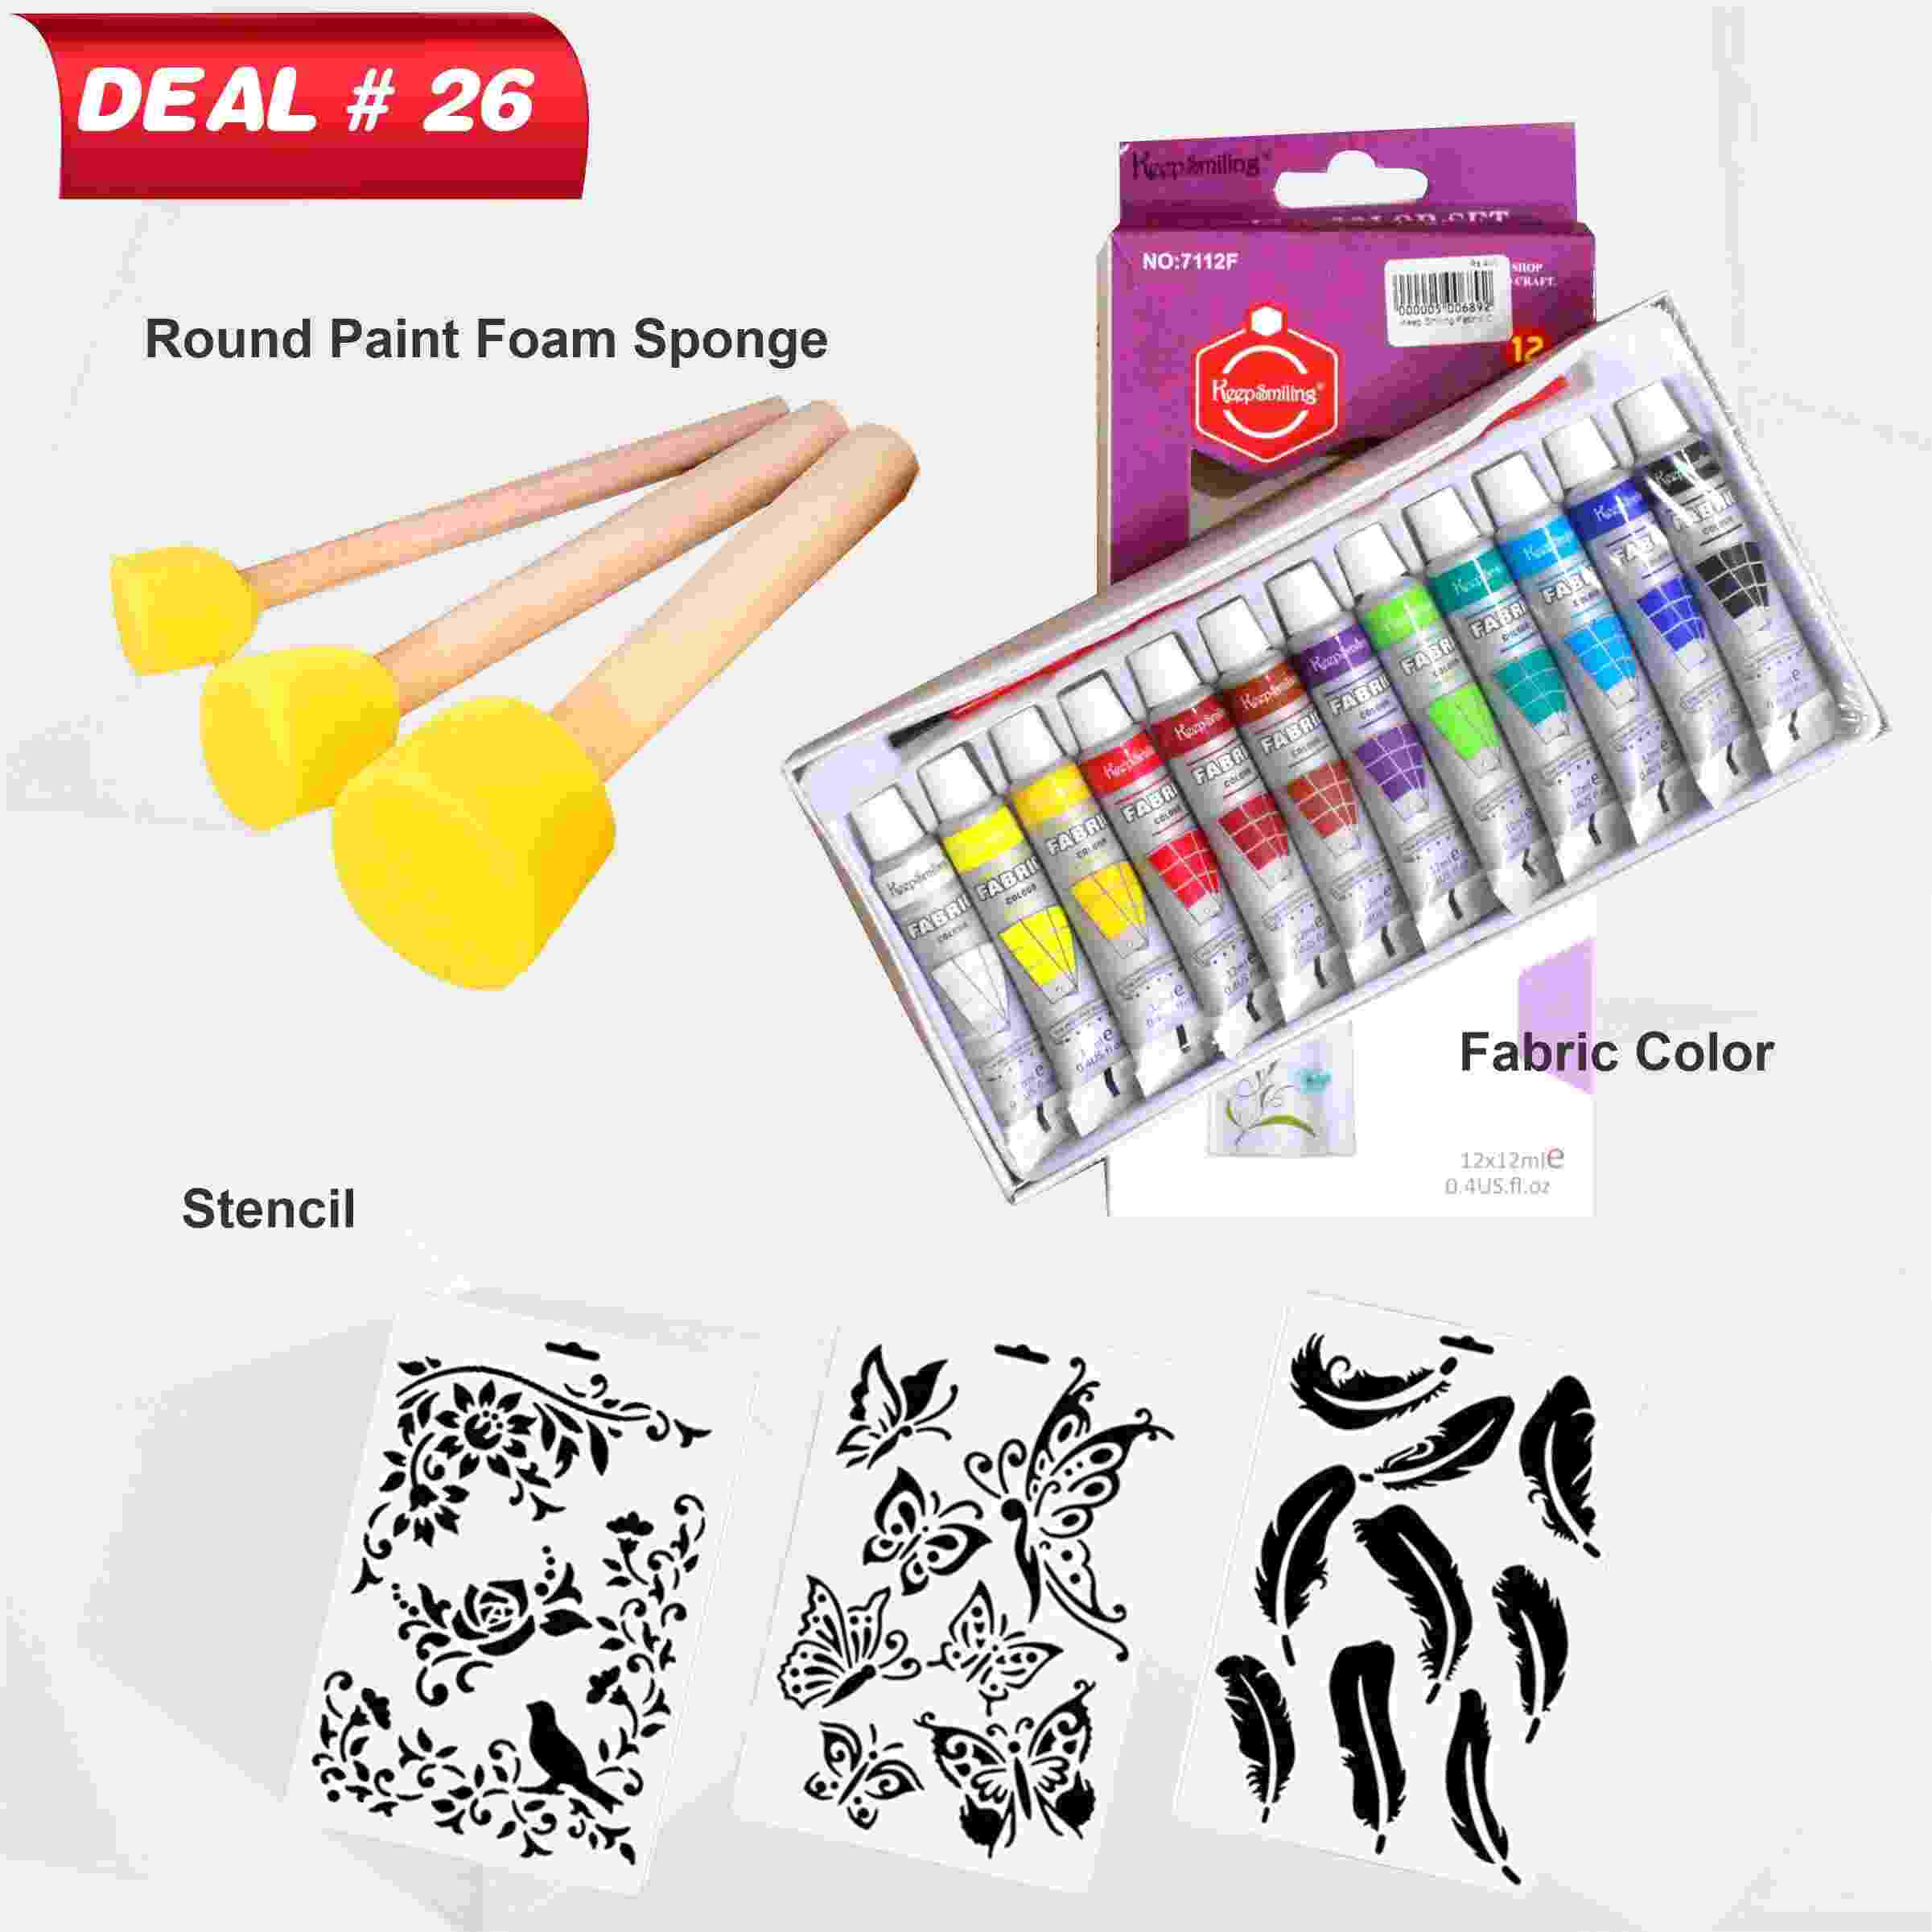 Creative Fabric Painting Deal No. 26